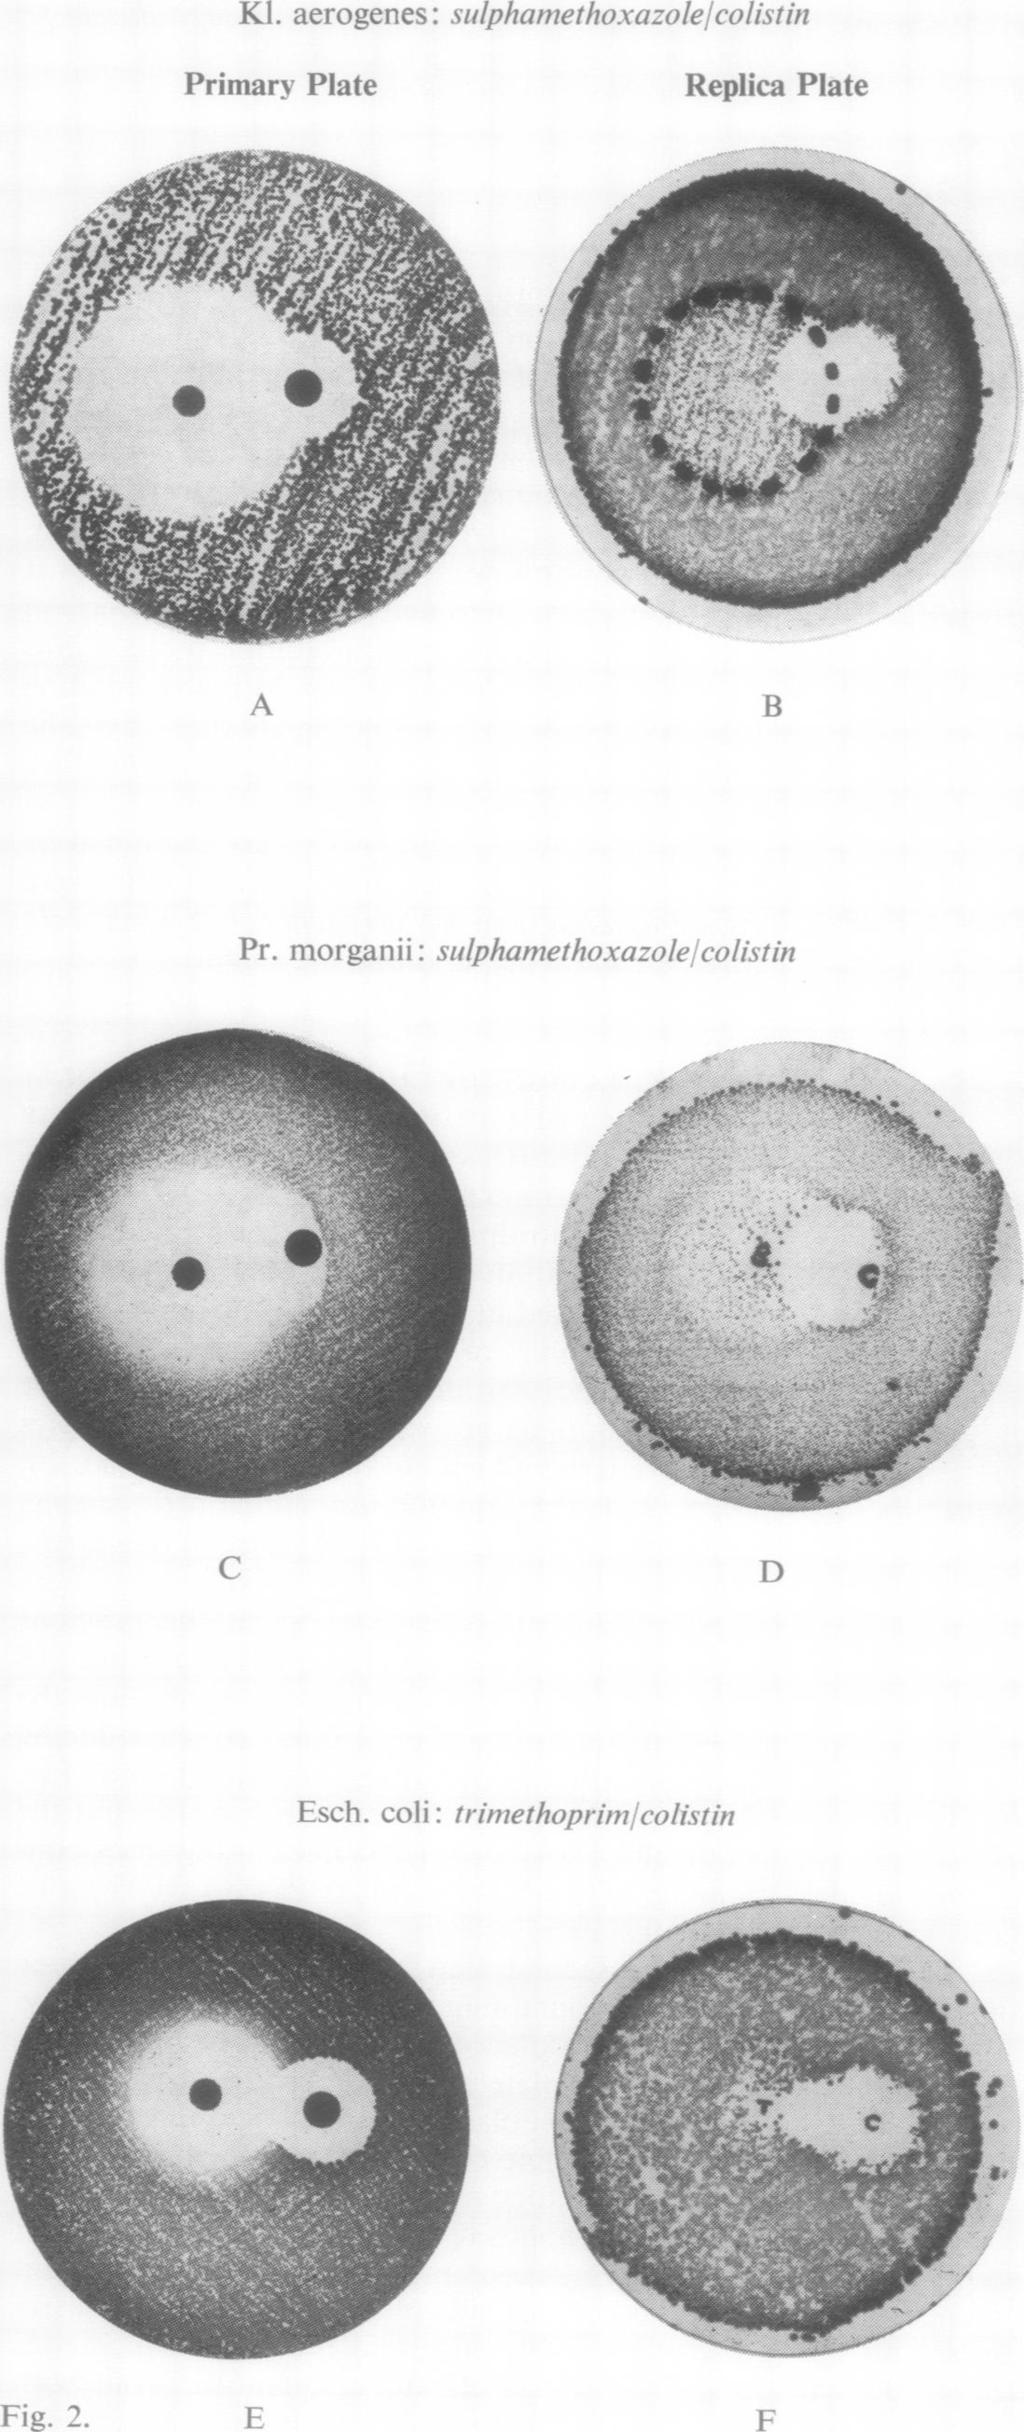 760 N. A. Simnmons Fig. 2 Results of replica plating. Colistin discs on the right of each plate, trimethoprim or sulpha- )T 'I; methoxazole on the left. opposite the centre colistin disc.